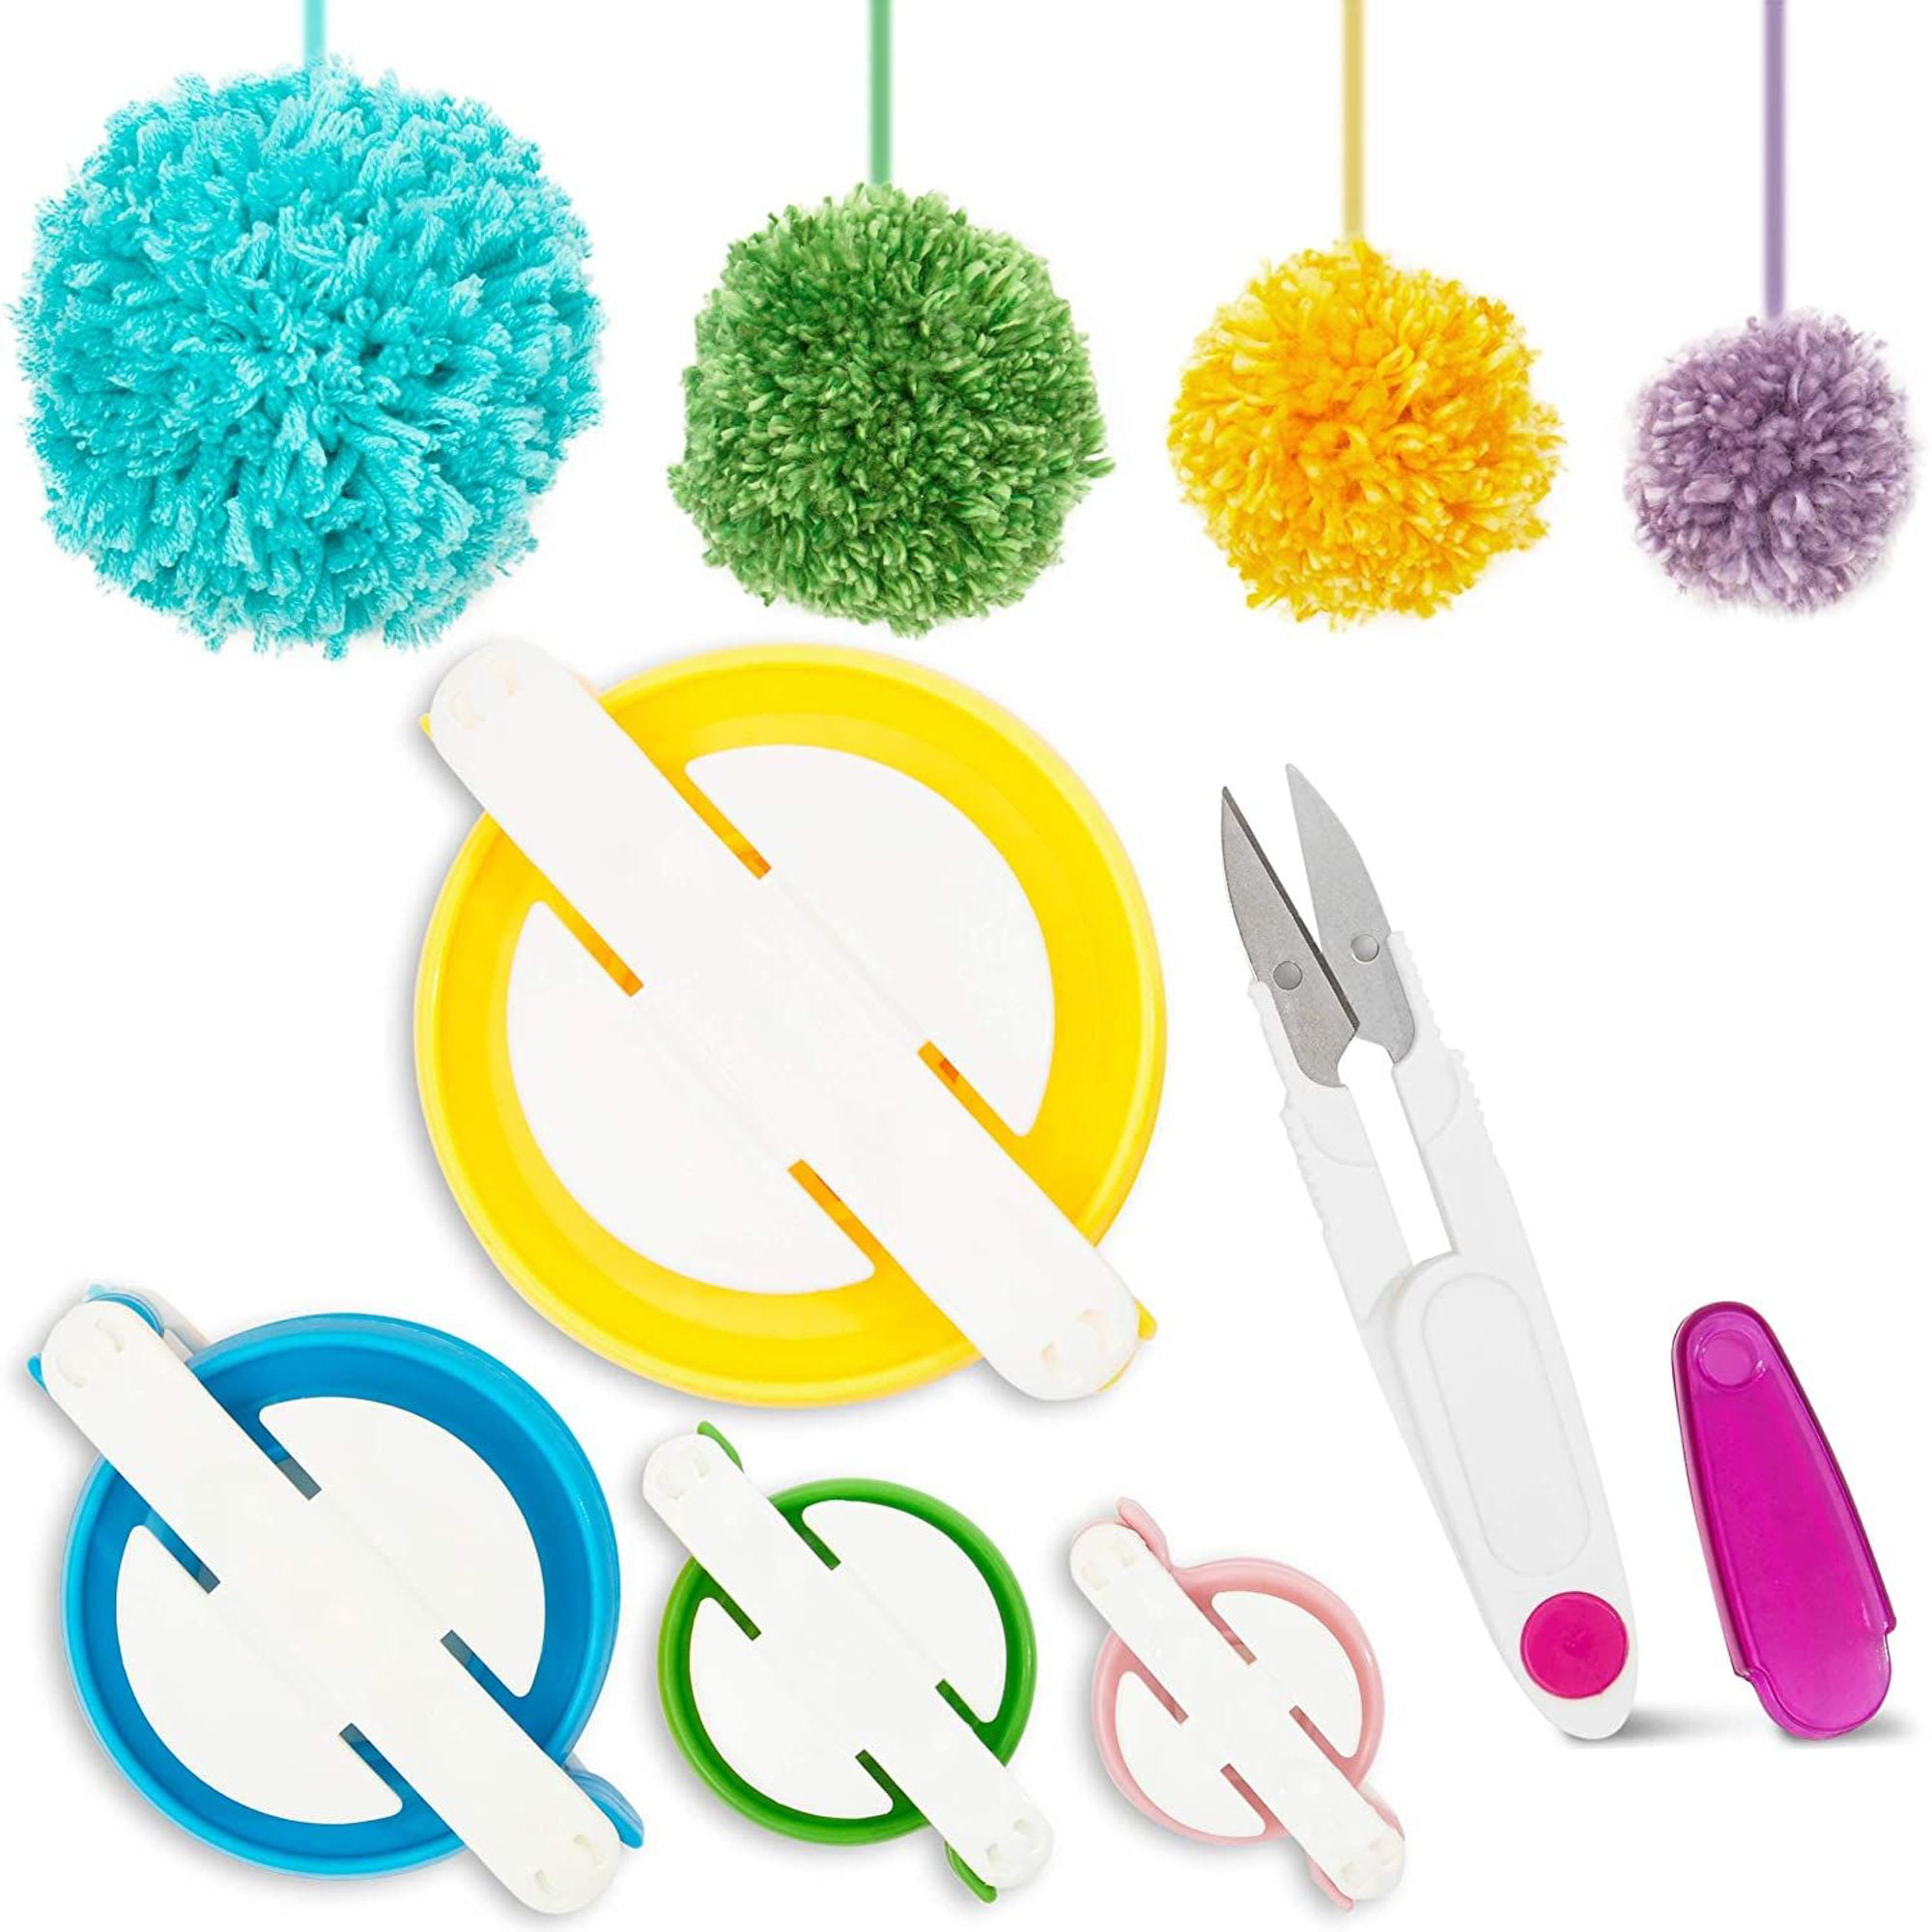 4 Sizes Pompom Maker Tool Set for Fluff Ball Weave DIY Wool Yarn Knitting Craft Project for Kids and Adult 1PC Scissors 5 Pom Pom Maker